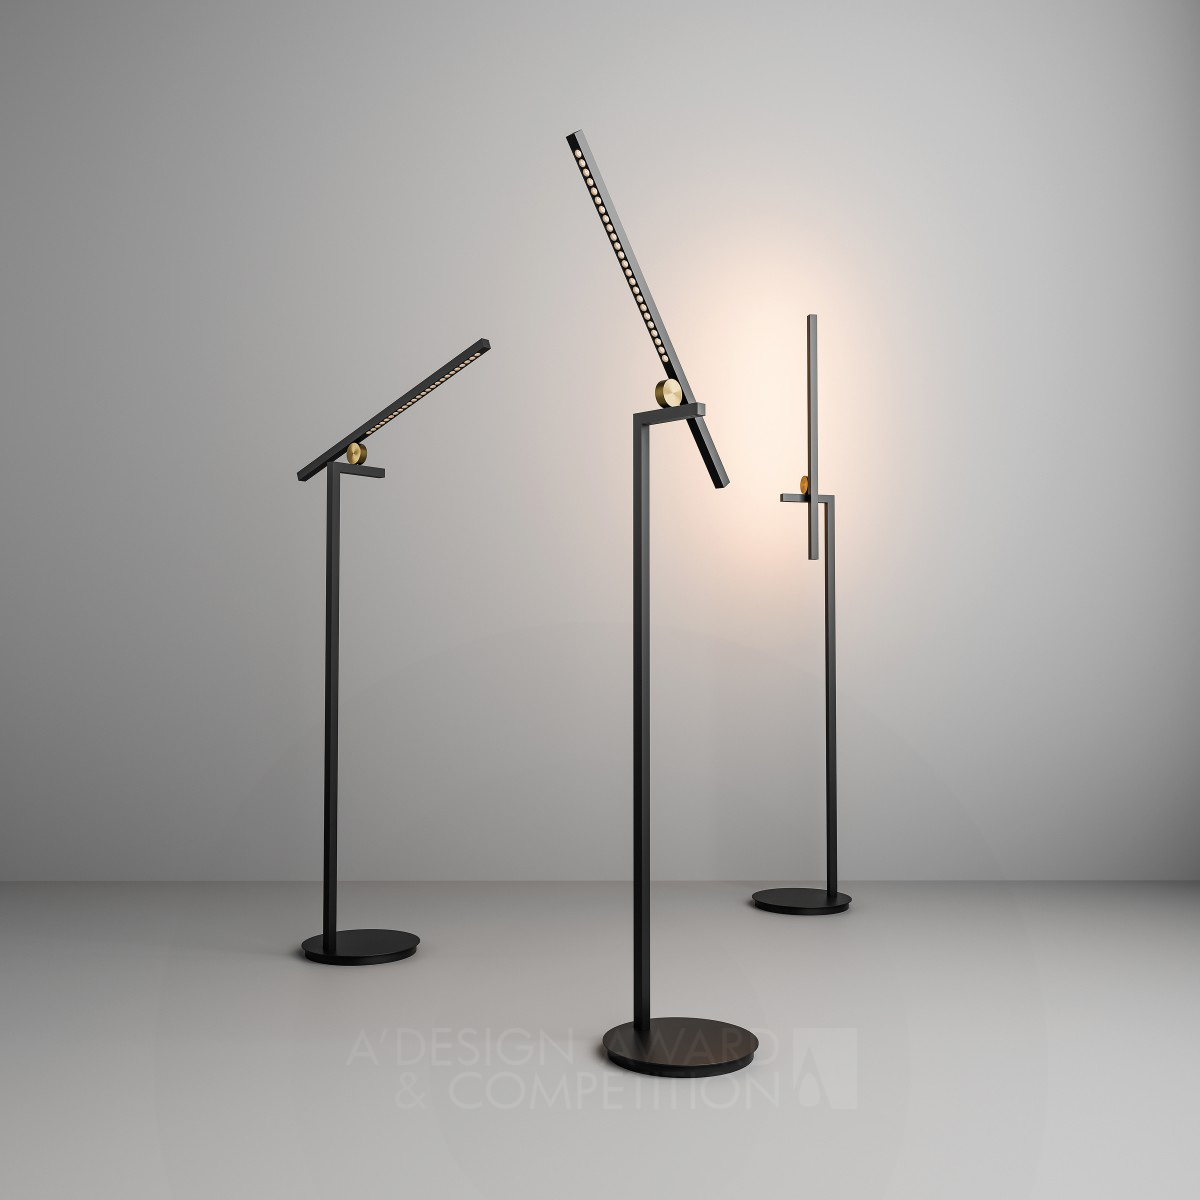 Alexey Danilin wins Bronze at the prestigious A' Lighting Products and Fixtures Design Award with Empathy Floor Lamp.